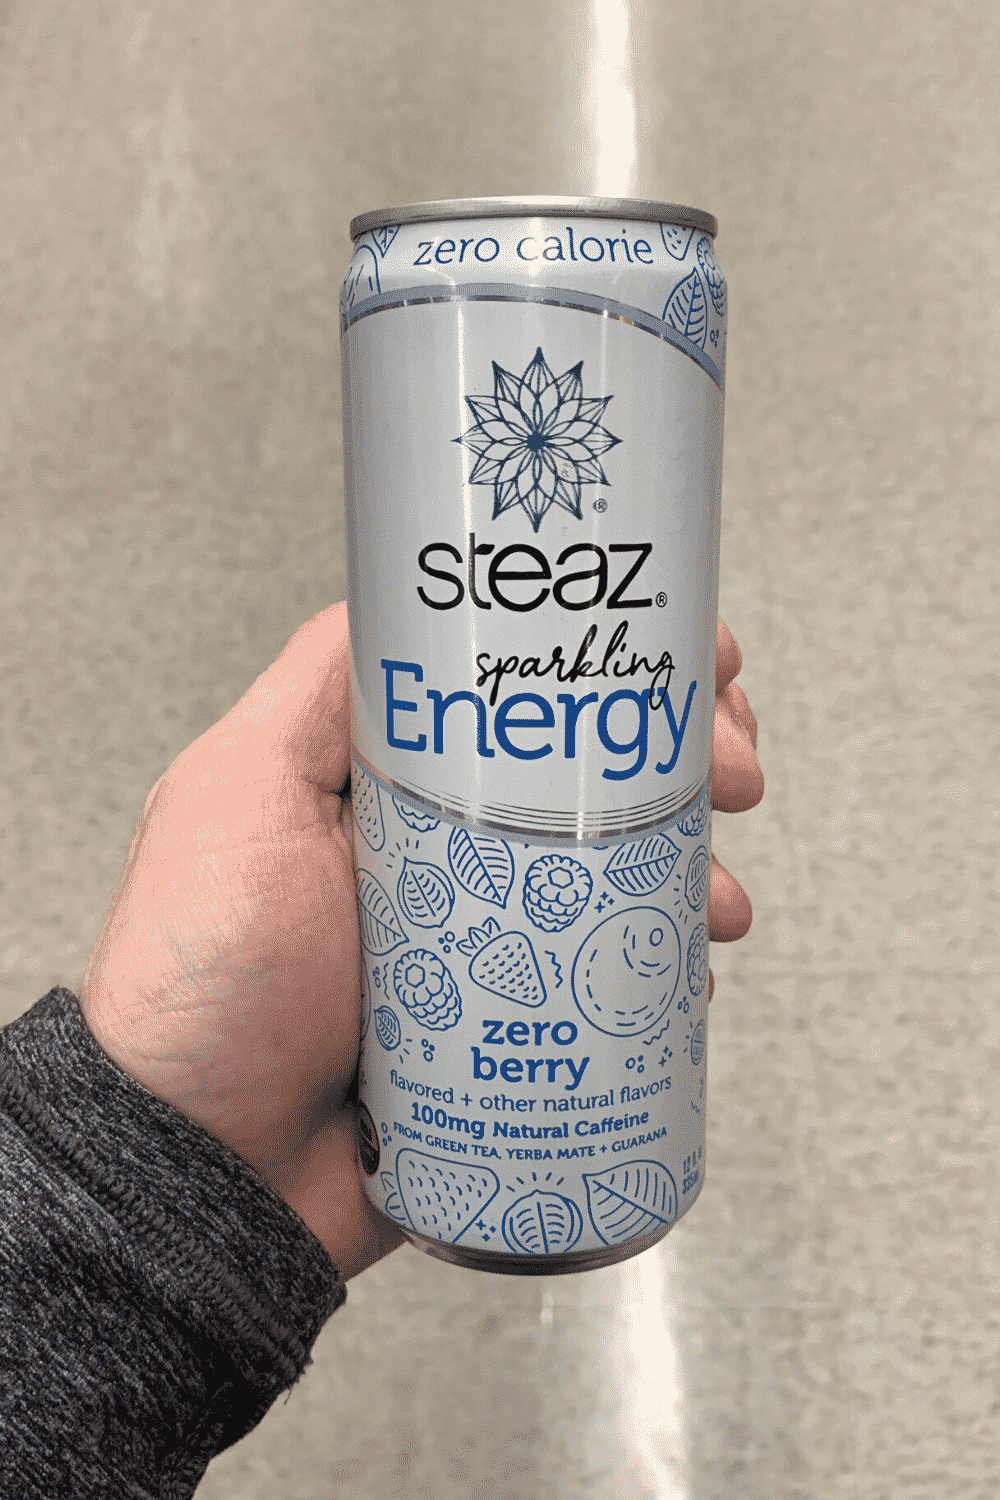 A hand holding a can of zero calorie zero berry flavored Steaz sparkling energy drink